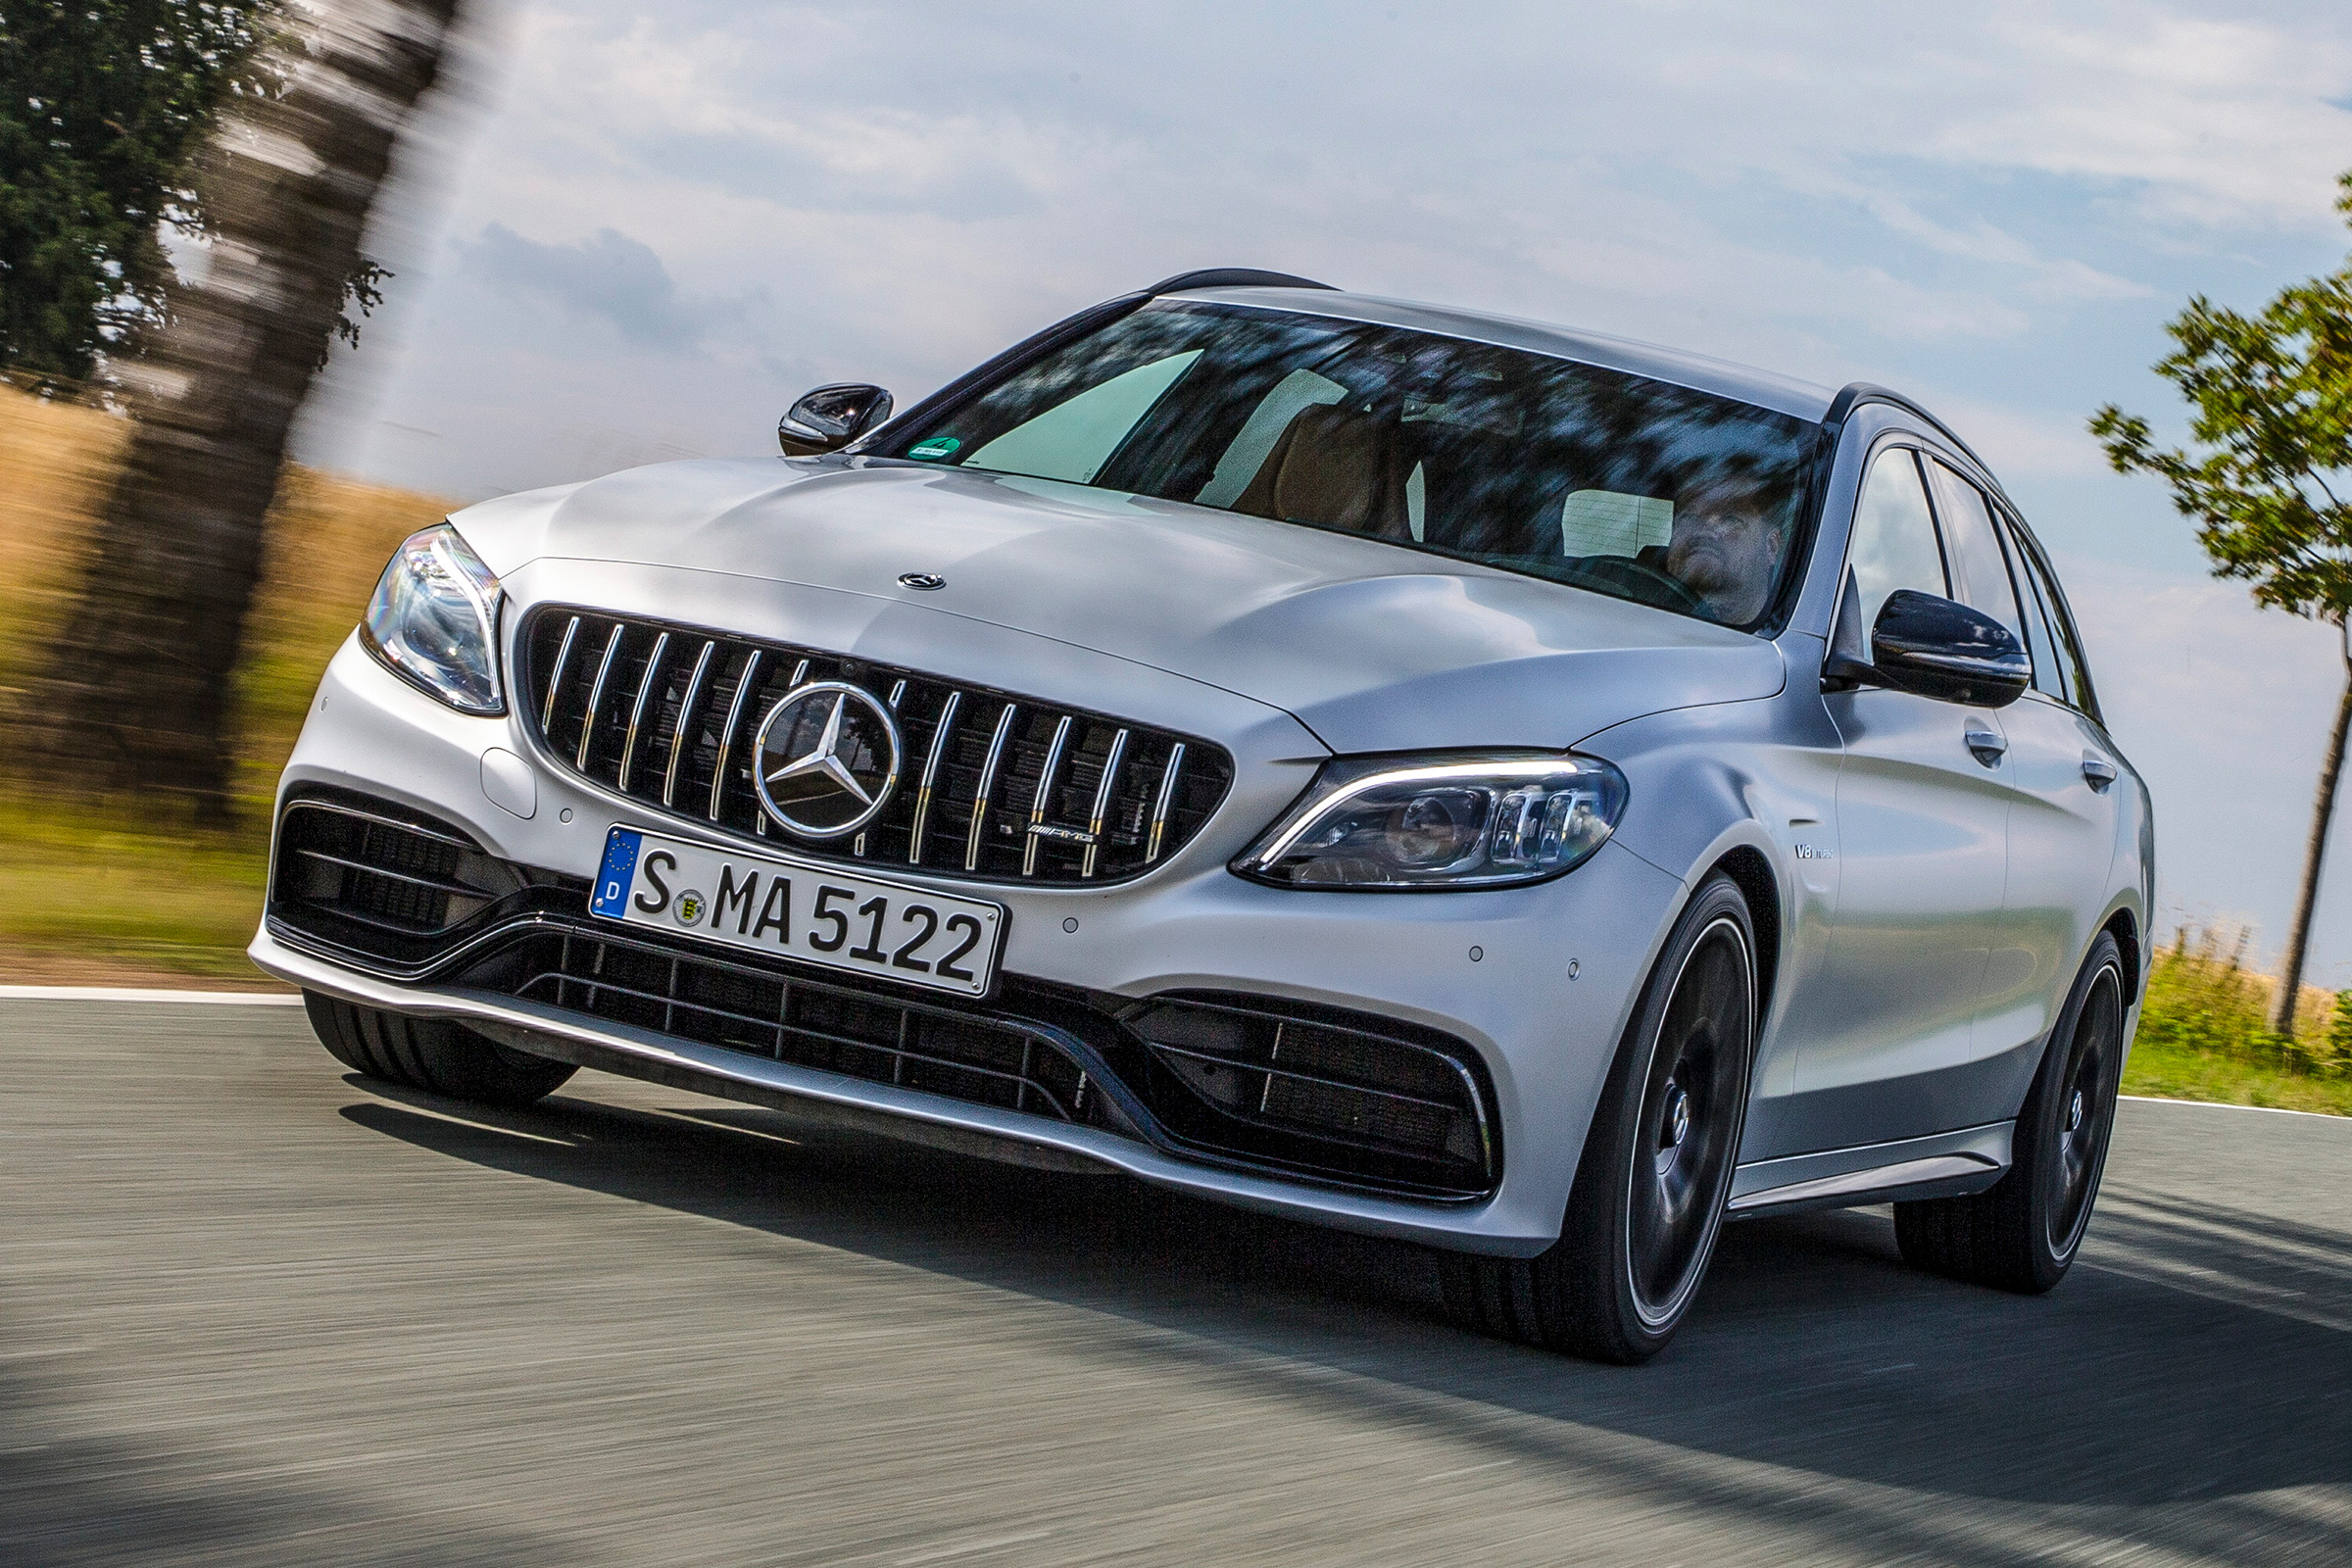 Mercedes Amg C63 S Estate Review Is Merc S Audi Rs4 Rival The Perfect Daily Evo